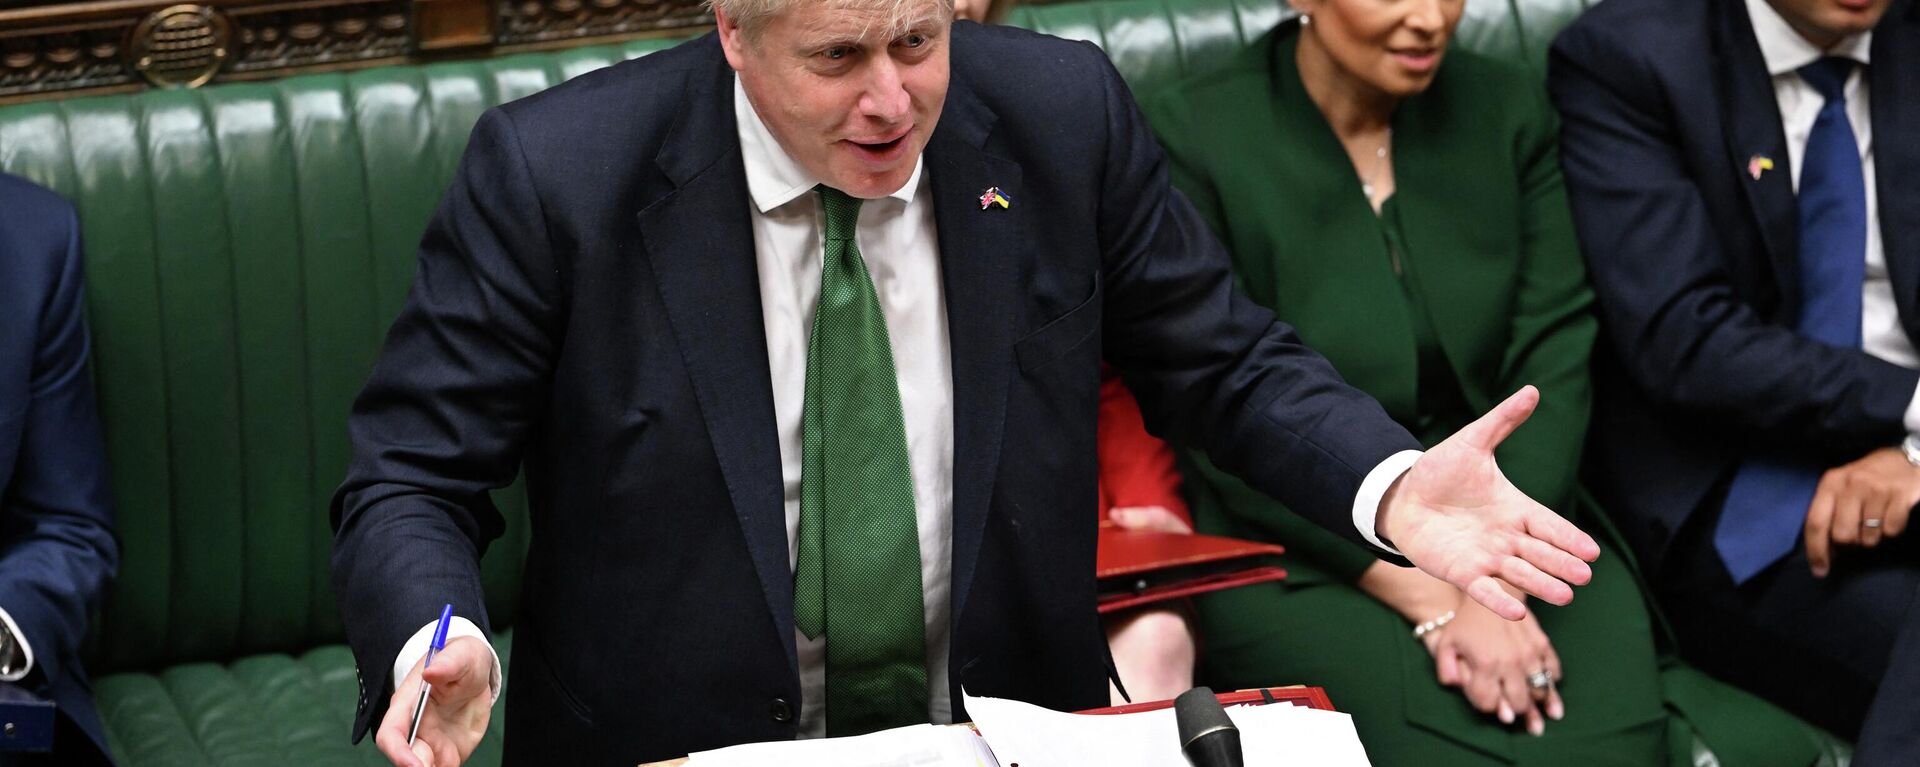 A handout photograph taken and released by the UK Parliament shows Britain's Prime Minister Boris Johnson attending the weekly Prime Minister's Questions (PMQs) session in the House of Commons, in London, on June 8, 2022 - Sputnik International, 1920, 09.06.2022